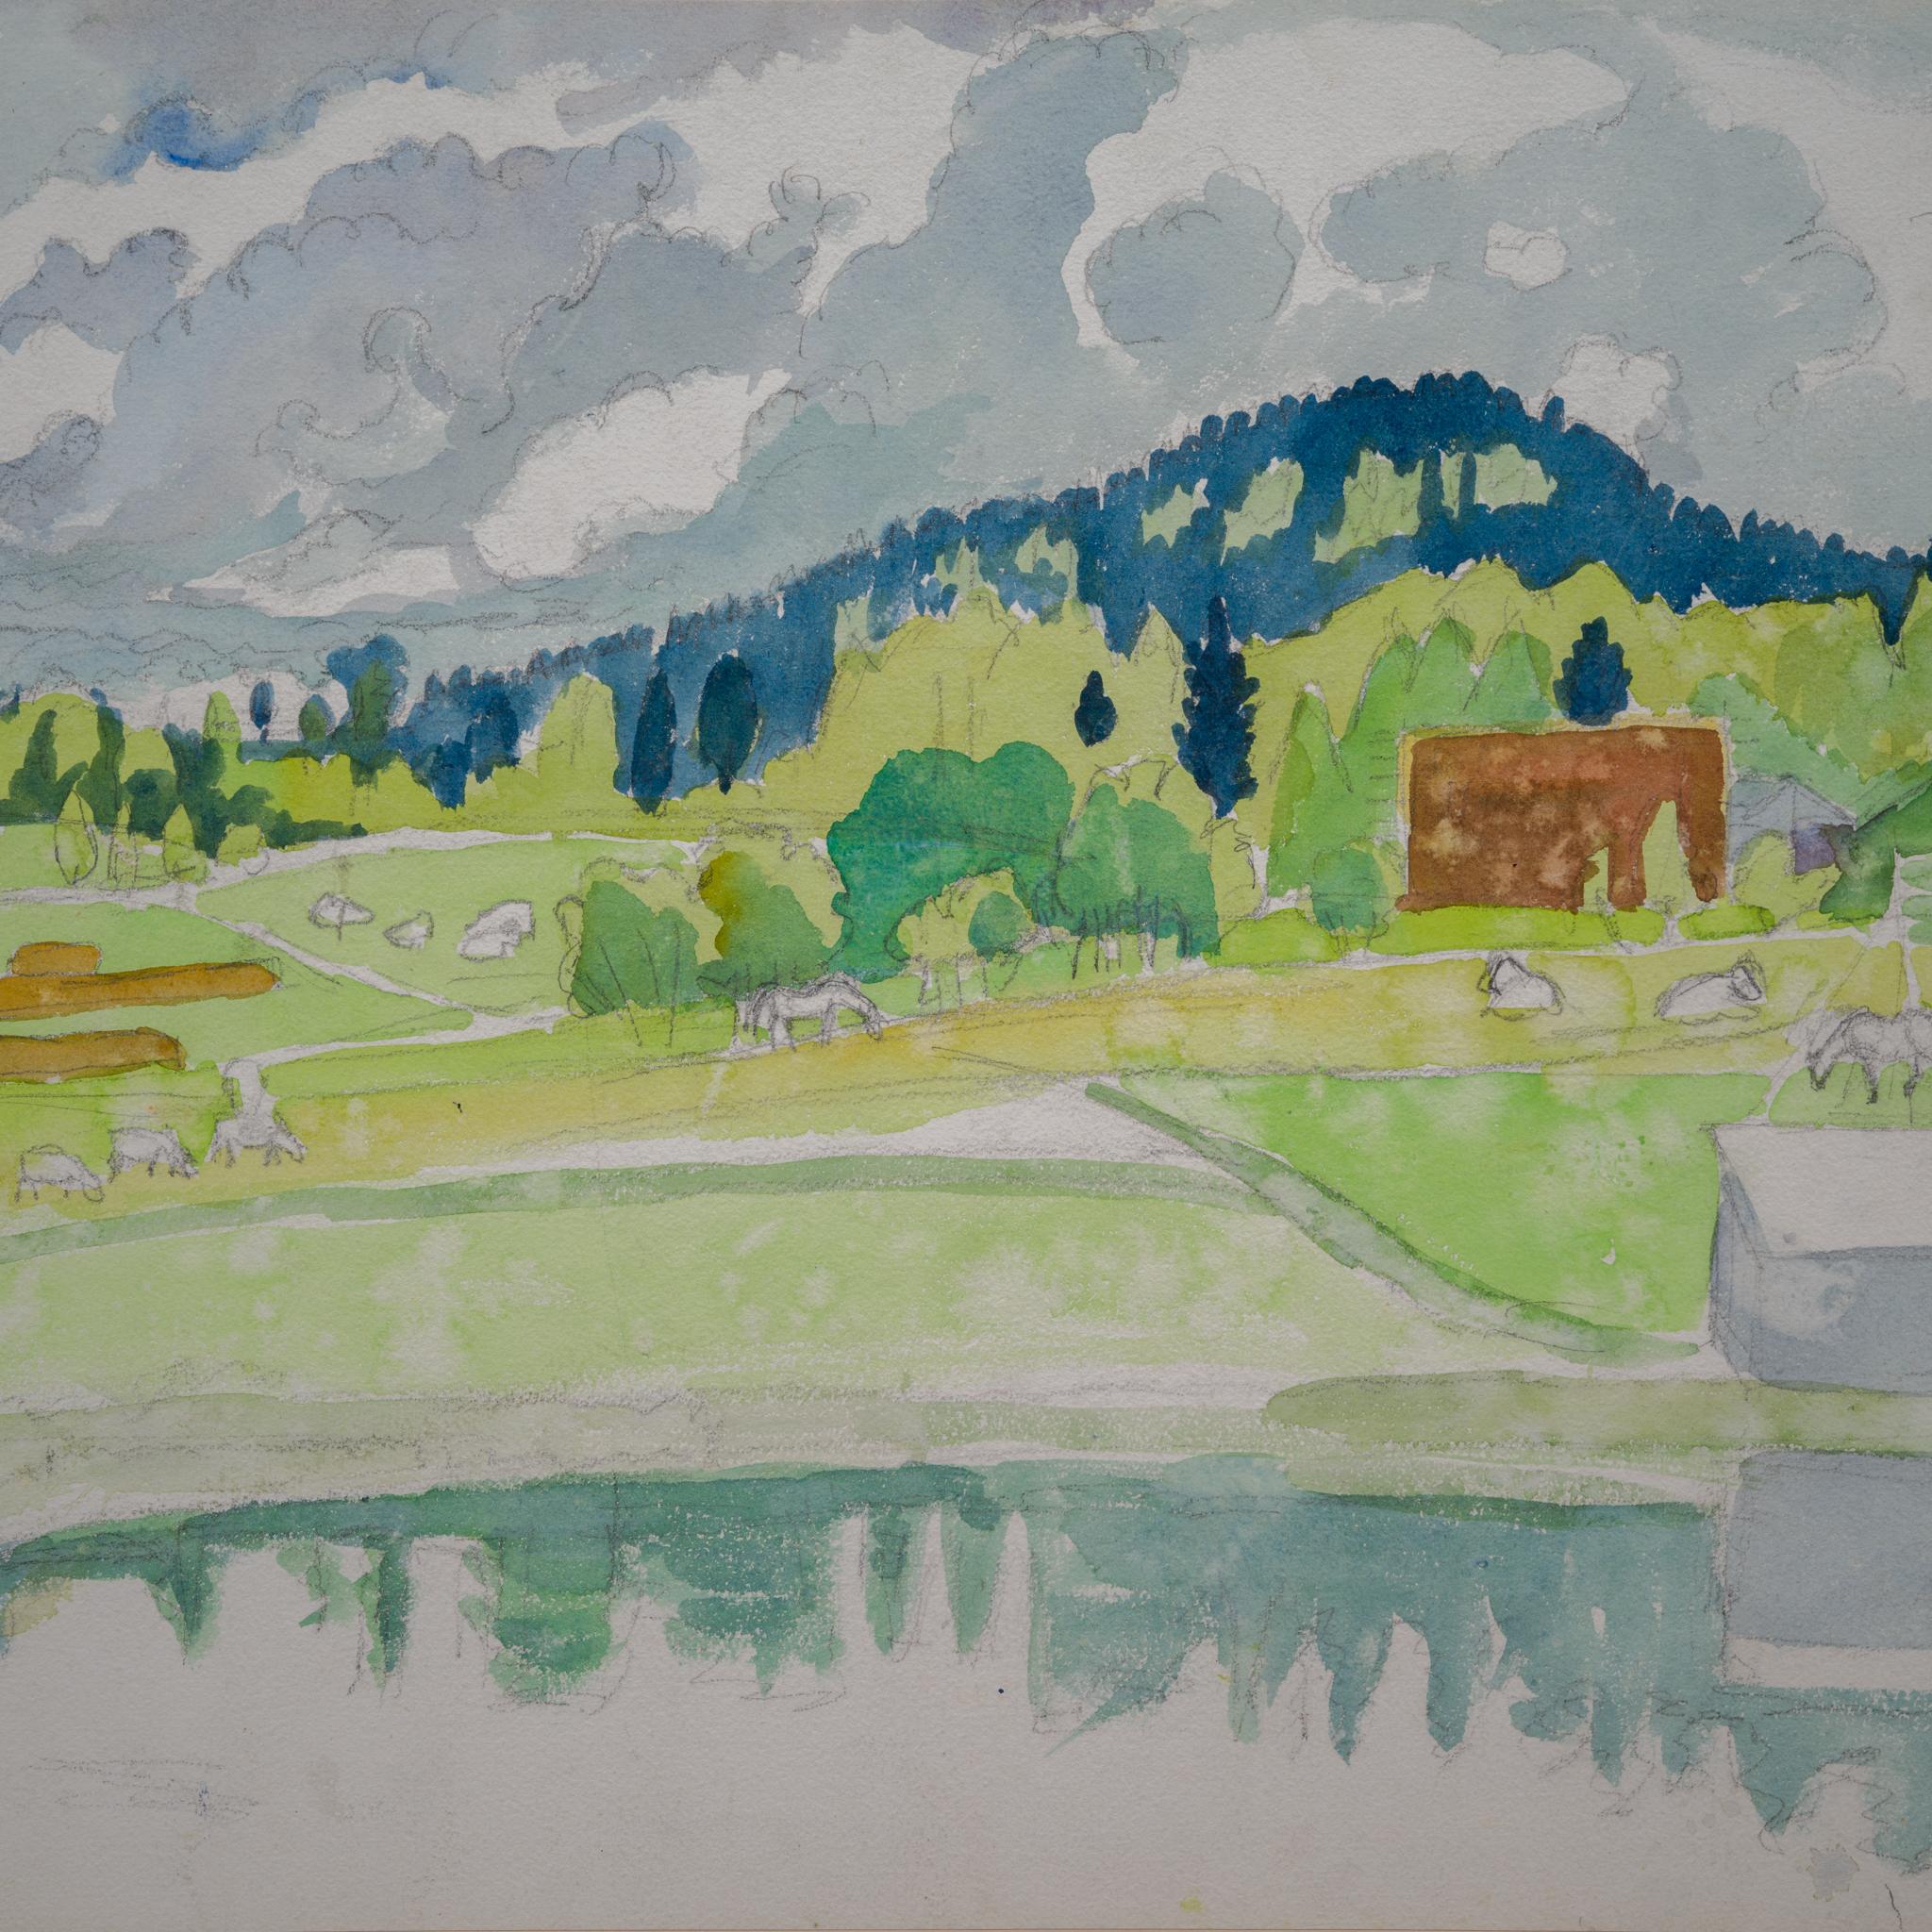 A Rural Landscape With Cows and Horses, Watercolor by Hilding Linnqvist For Sale 2